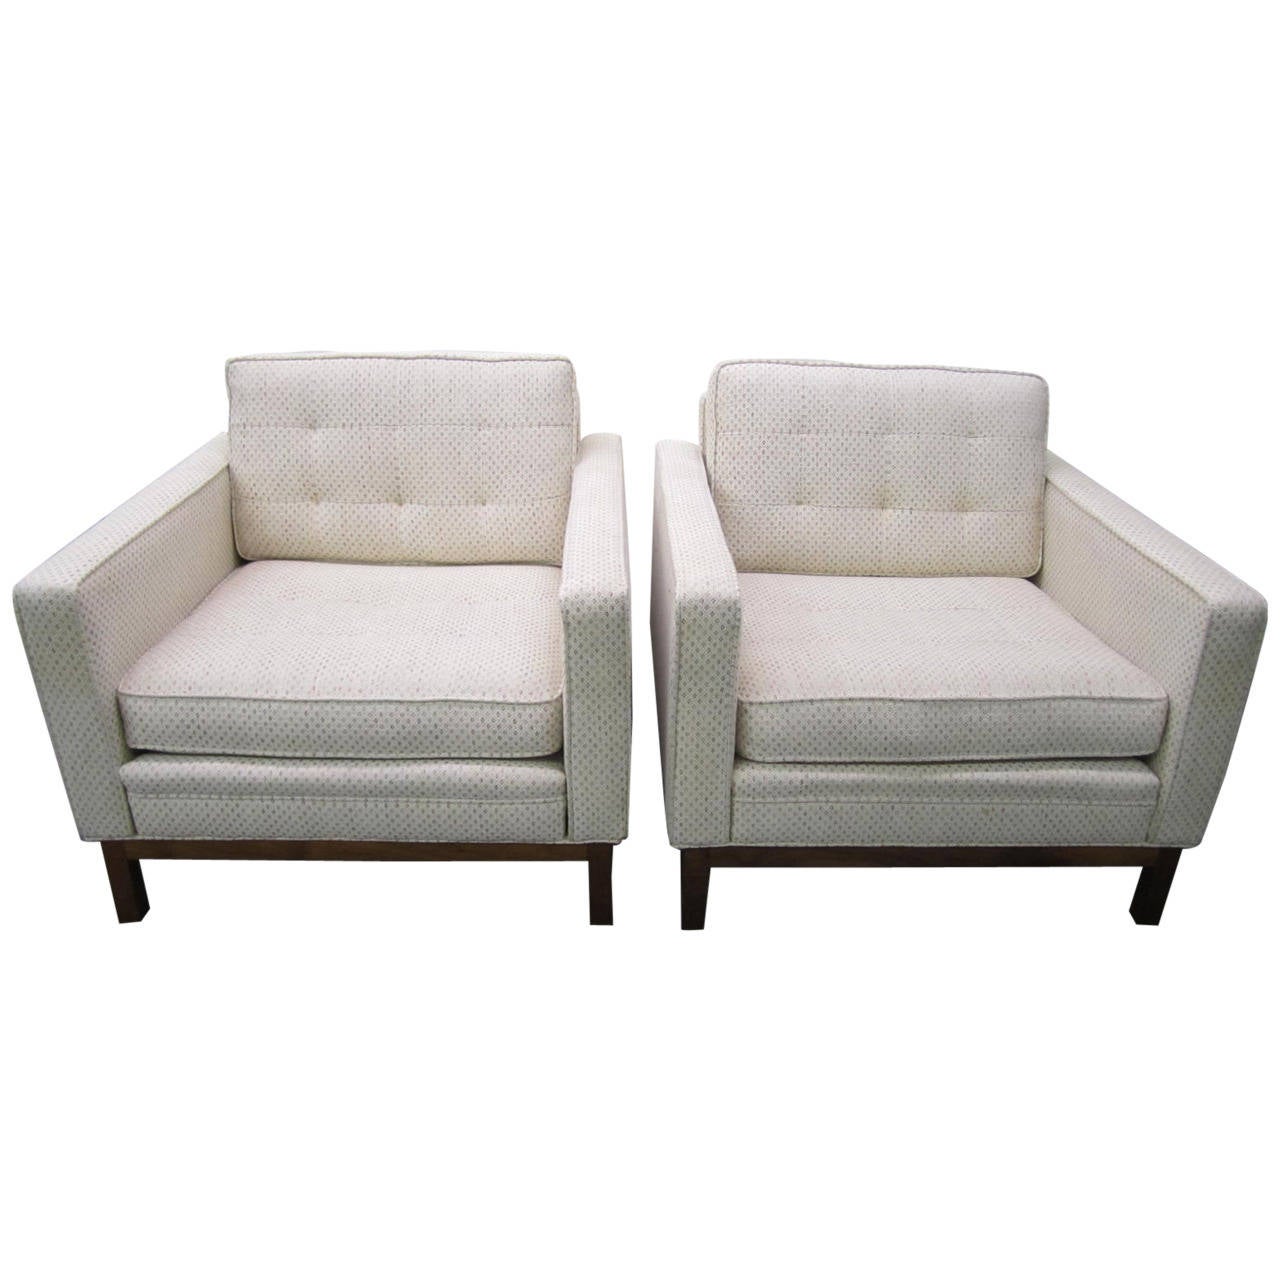 Handsome Pair of Harvey Probber Style Cube Arm Chairs Mid-Century Modern